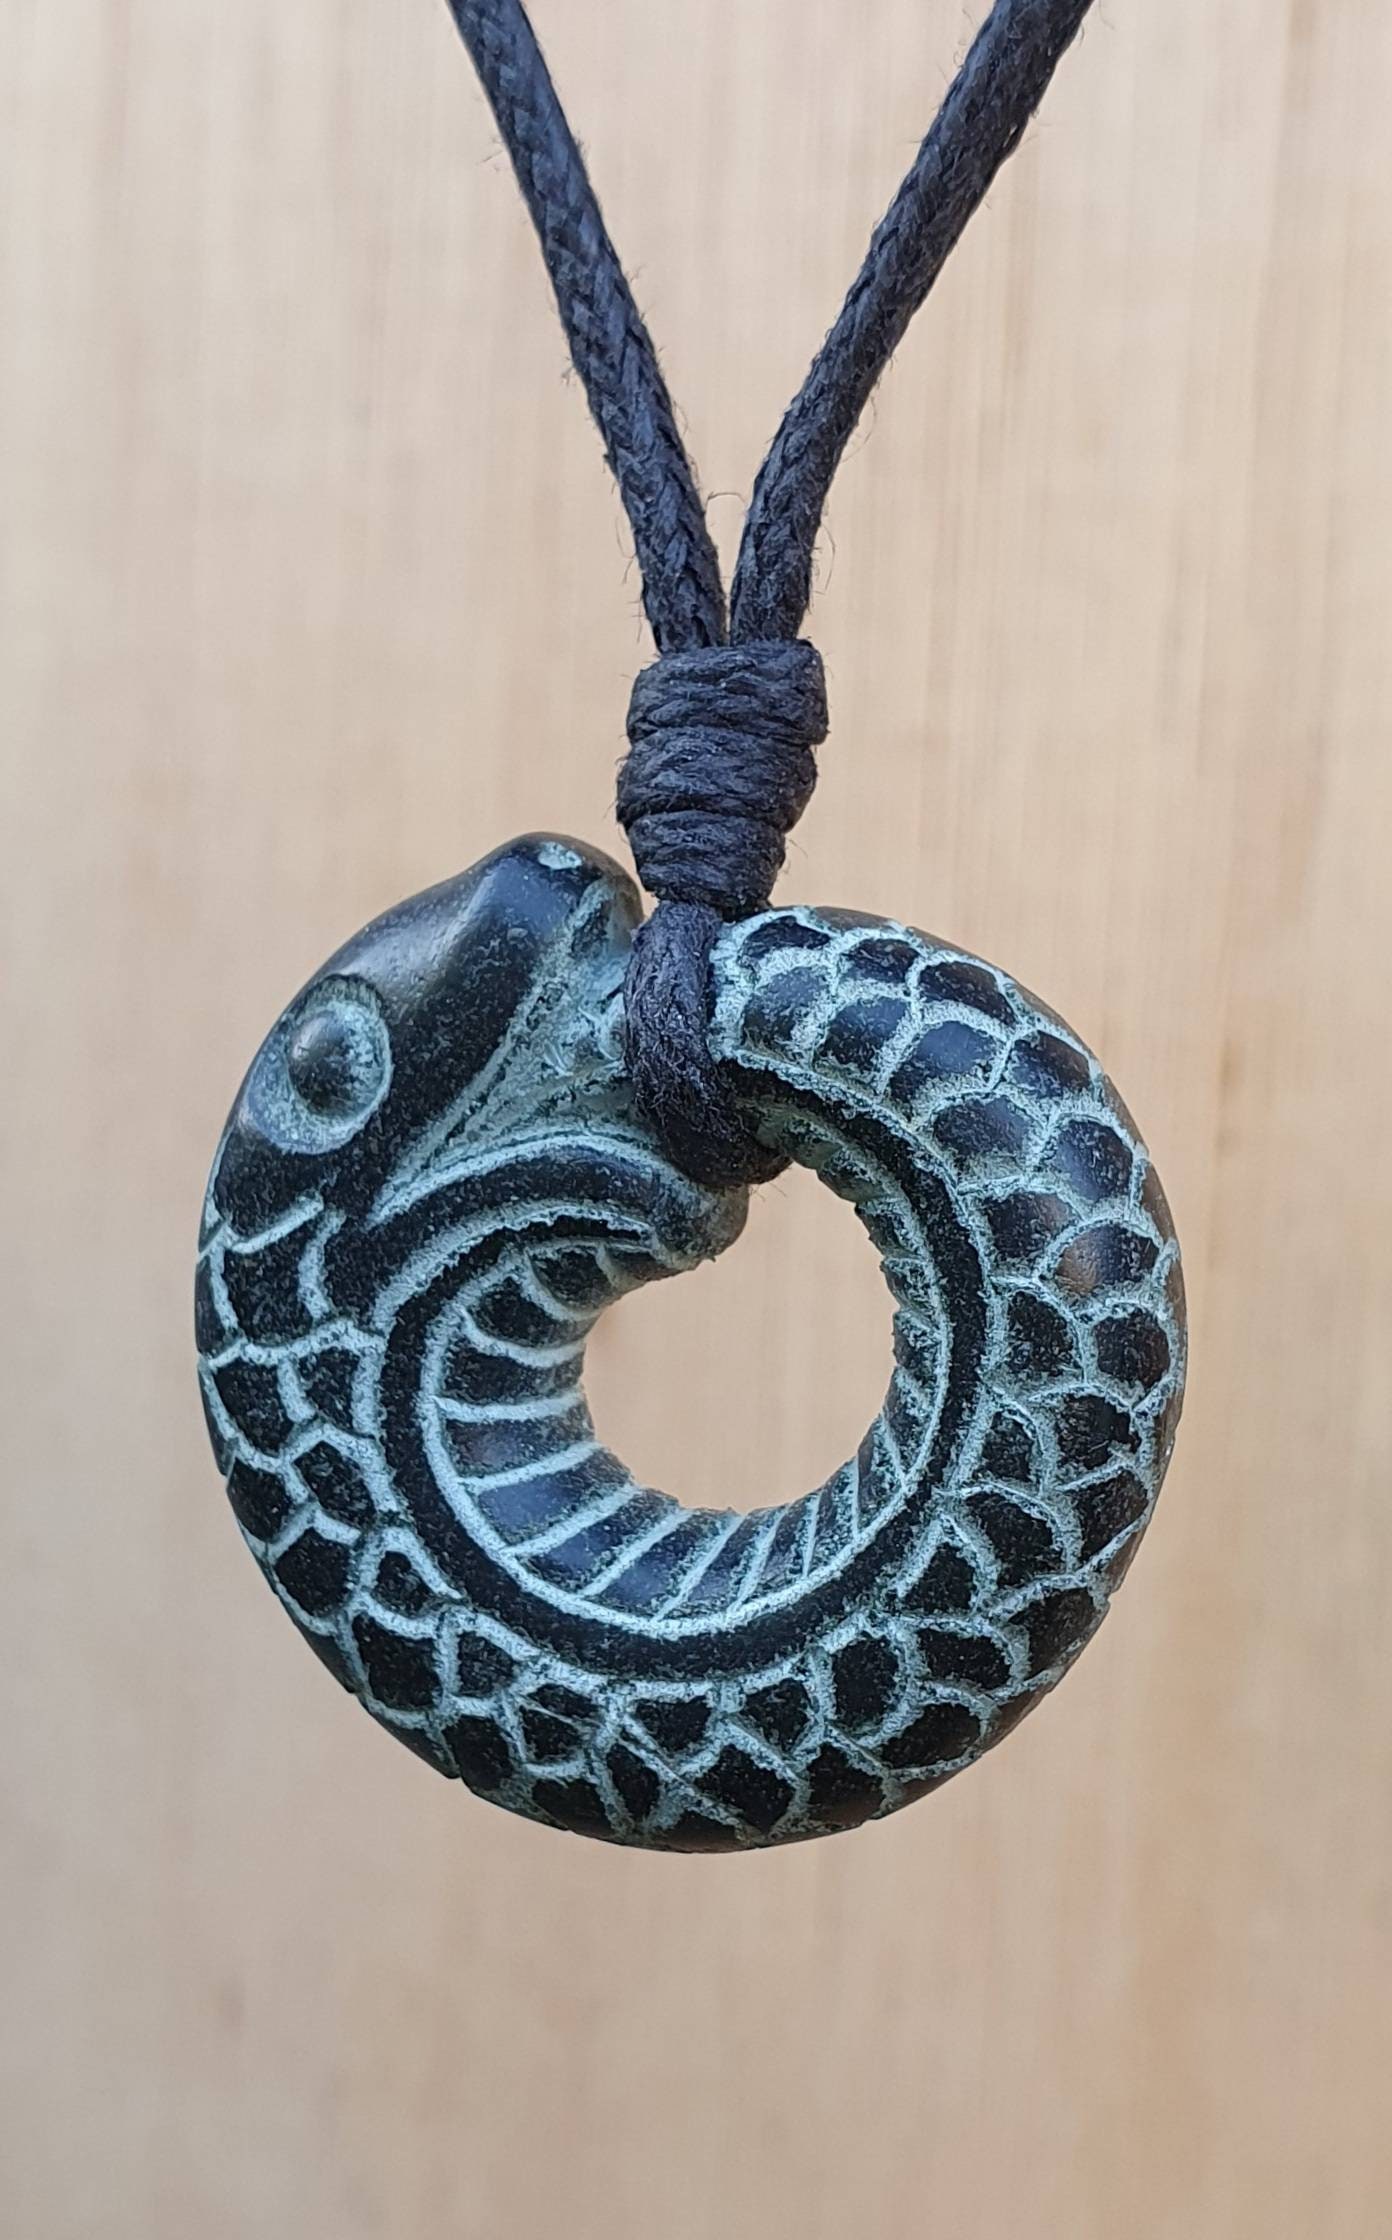 Ouroboros circle talisman, Viking world snake jewelry, Norse Dragon amulet,  infinity symbol from Artizan Made, A Handmade Collective of Online Shops